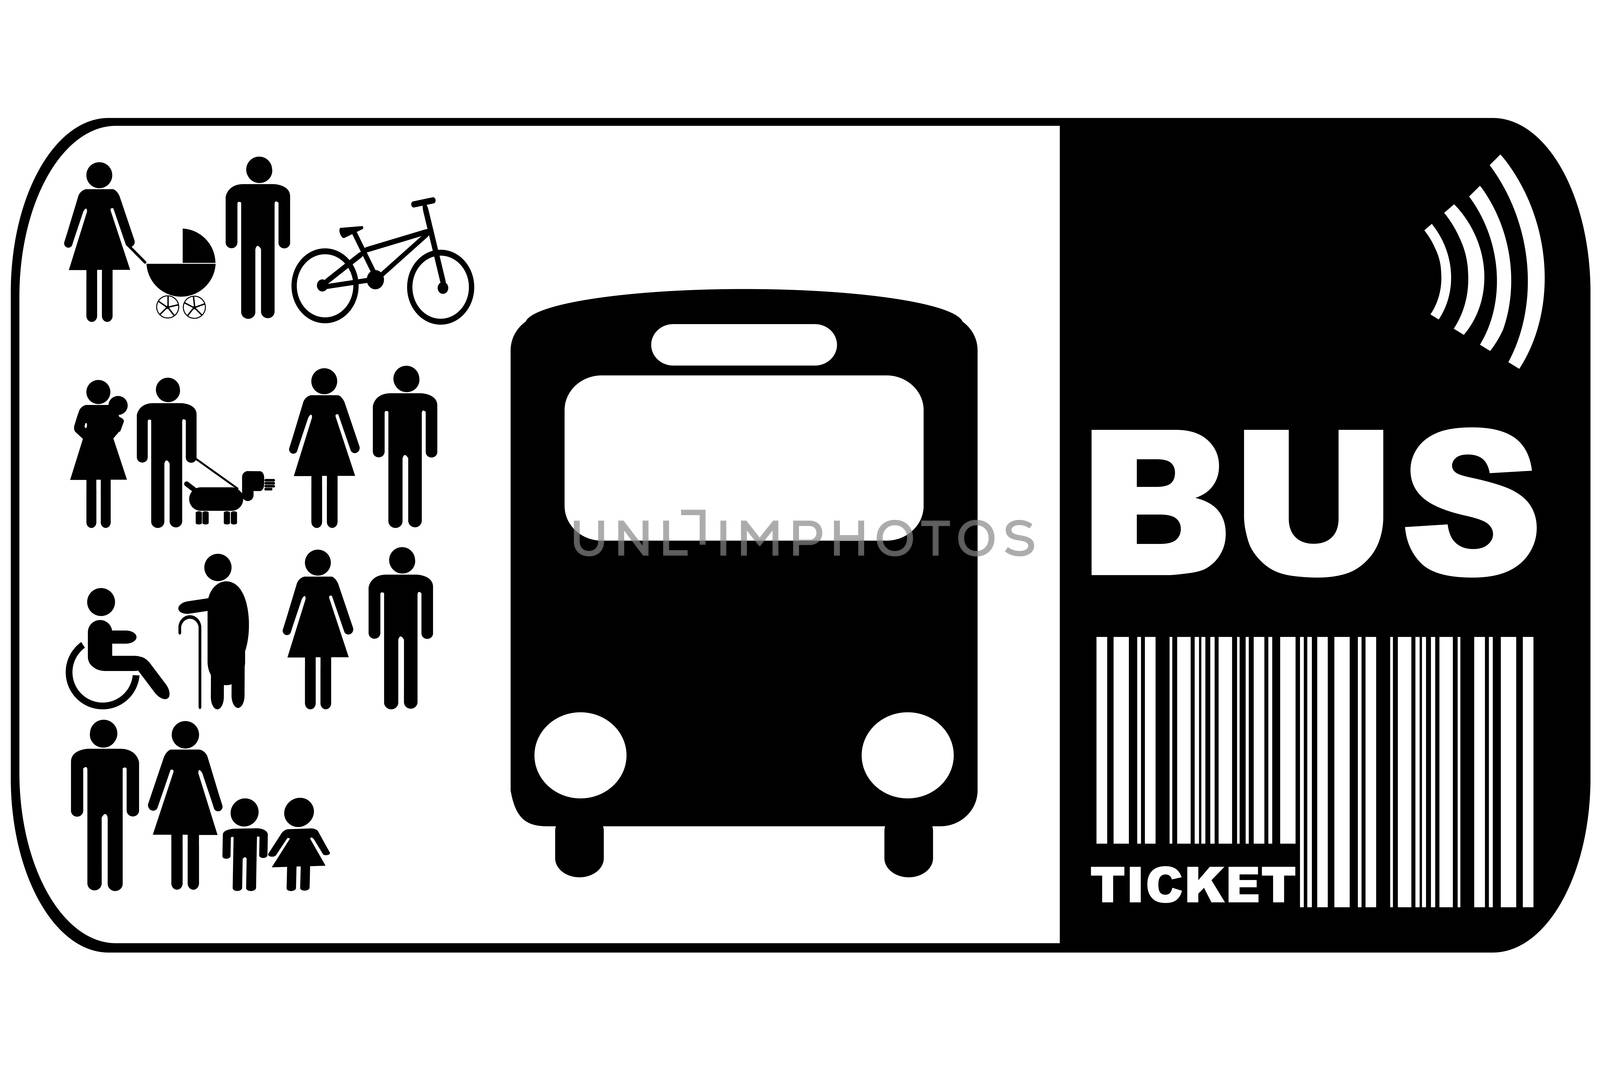 Bus ticket isolated on white background